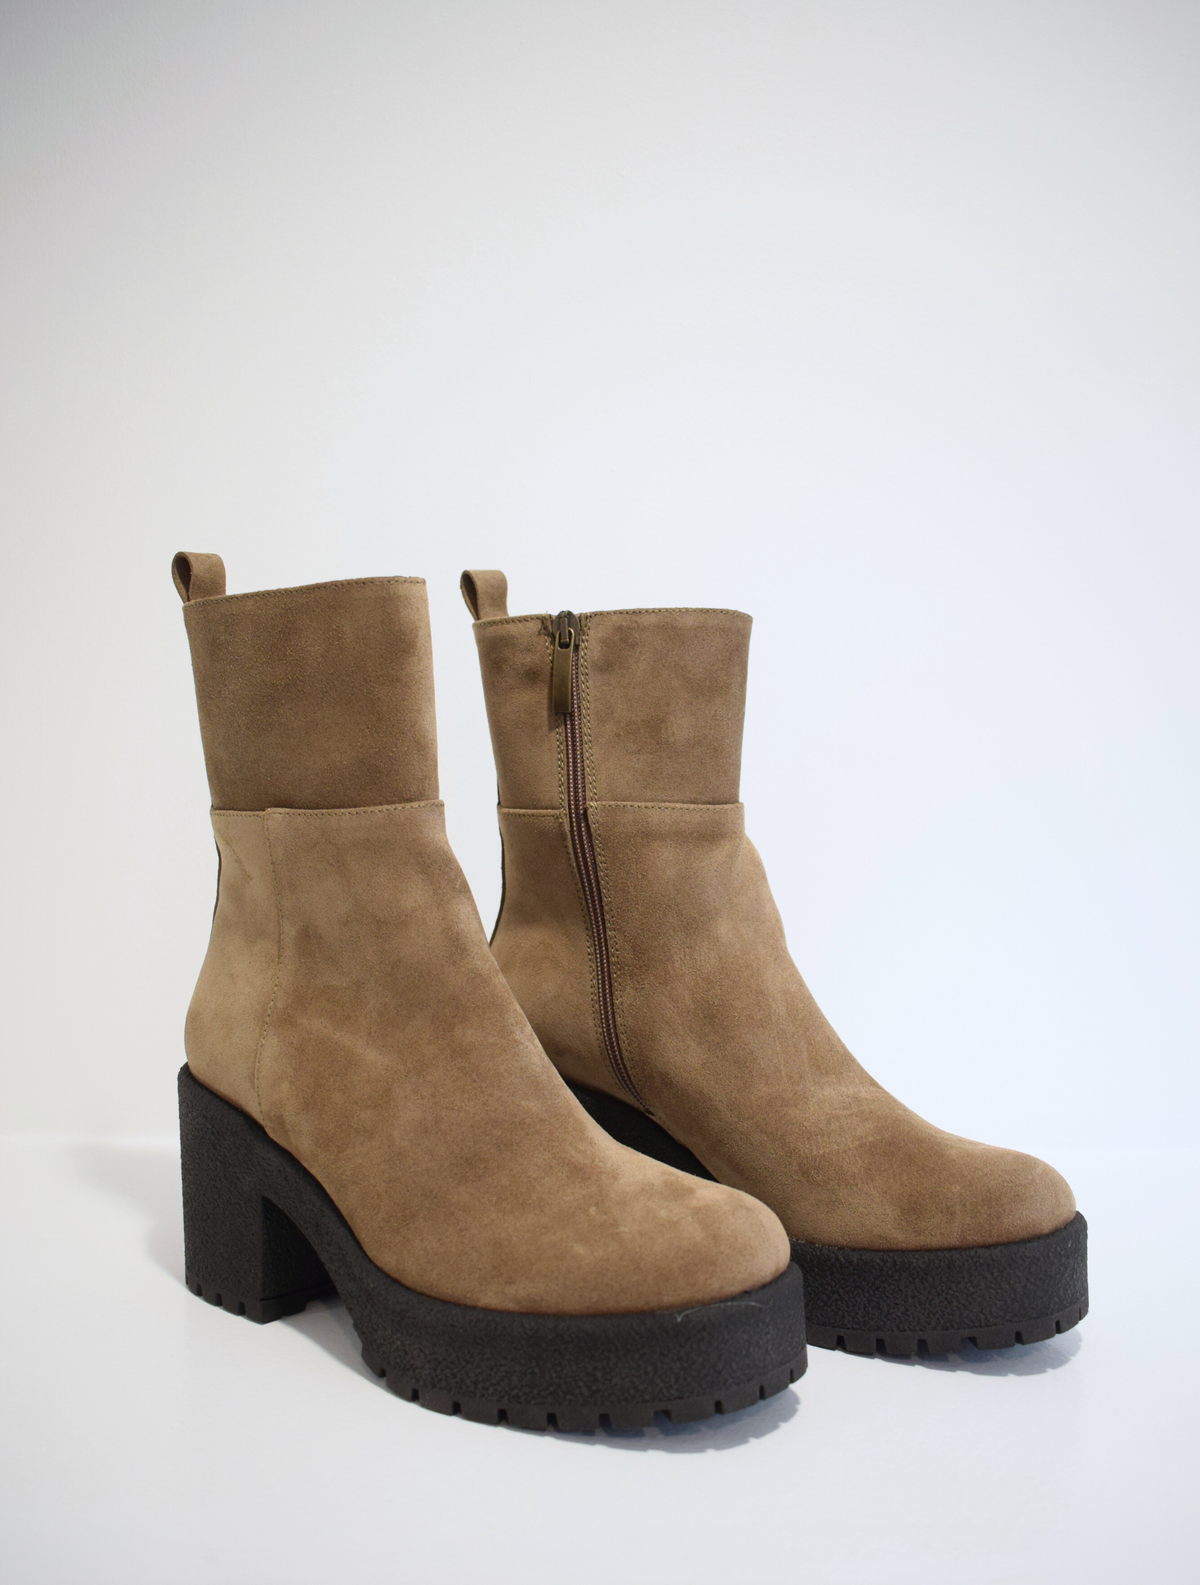 Taupe brown suede ankle boot with crepe black moulded rubber platform sole and heel